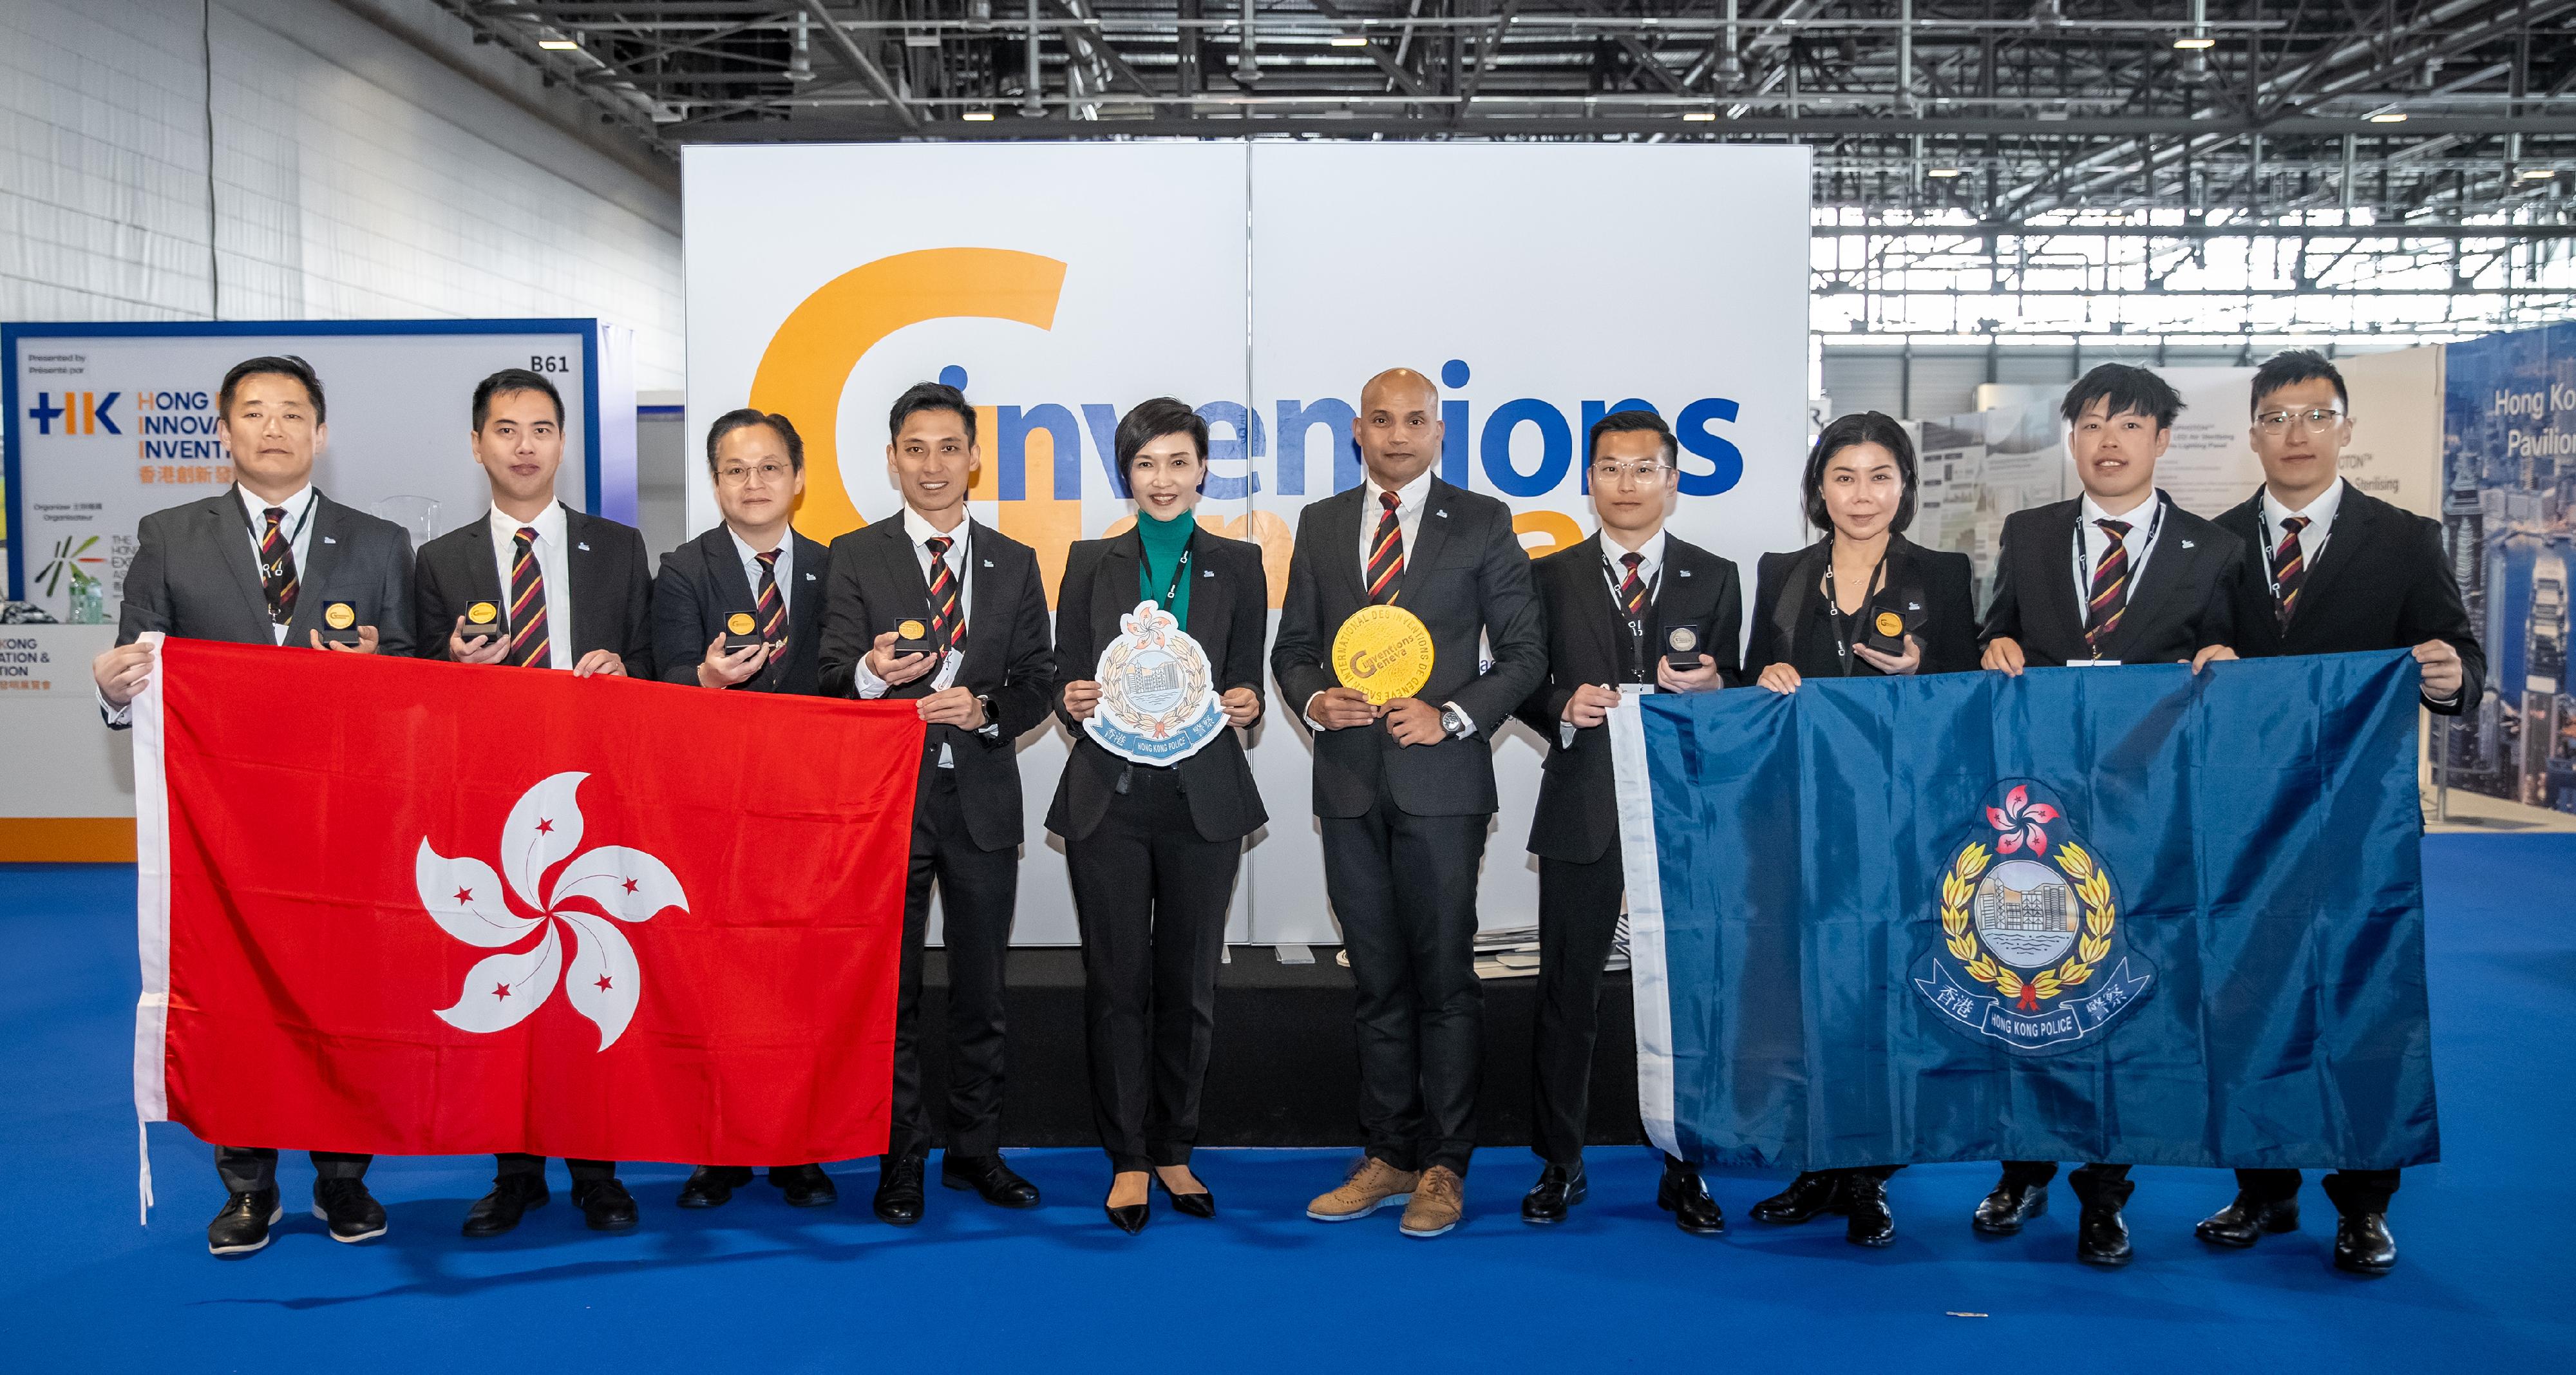 Officers of the Information Systems Wing of the Hong Kong Police Force participated in 49th International Exhibition of Inventions of Geneva, which was held between April 17 and 21 in Geneva, Switzerland, and garnered five Gold Medals and one Silver Medal, including a prestigious Gold Medal with the Congratulations of Jury.